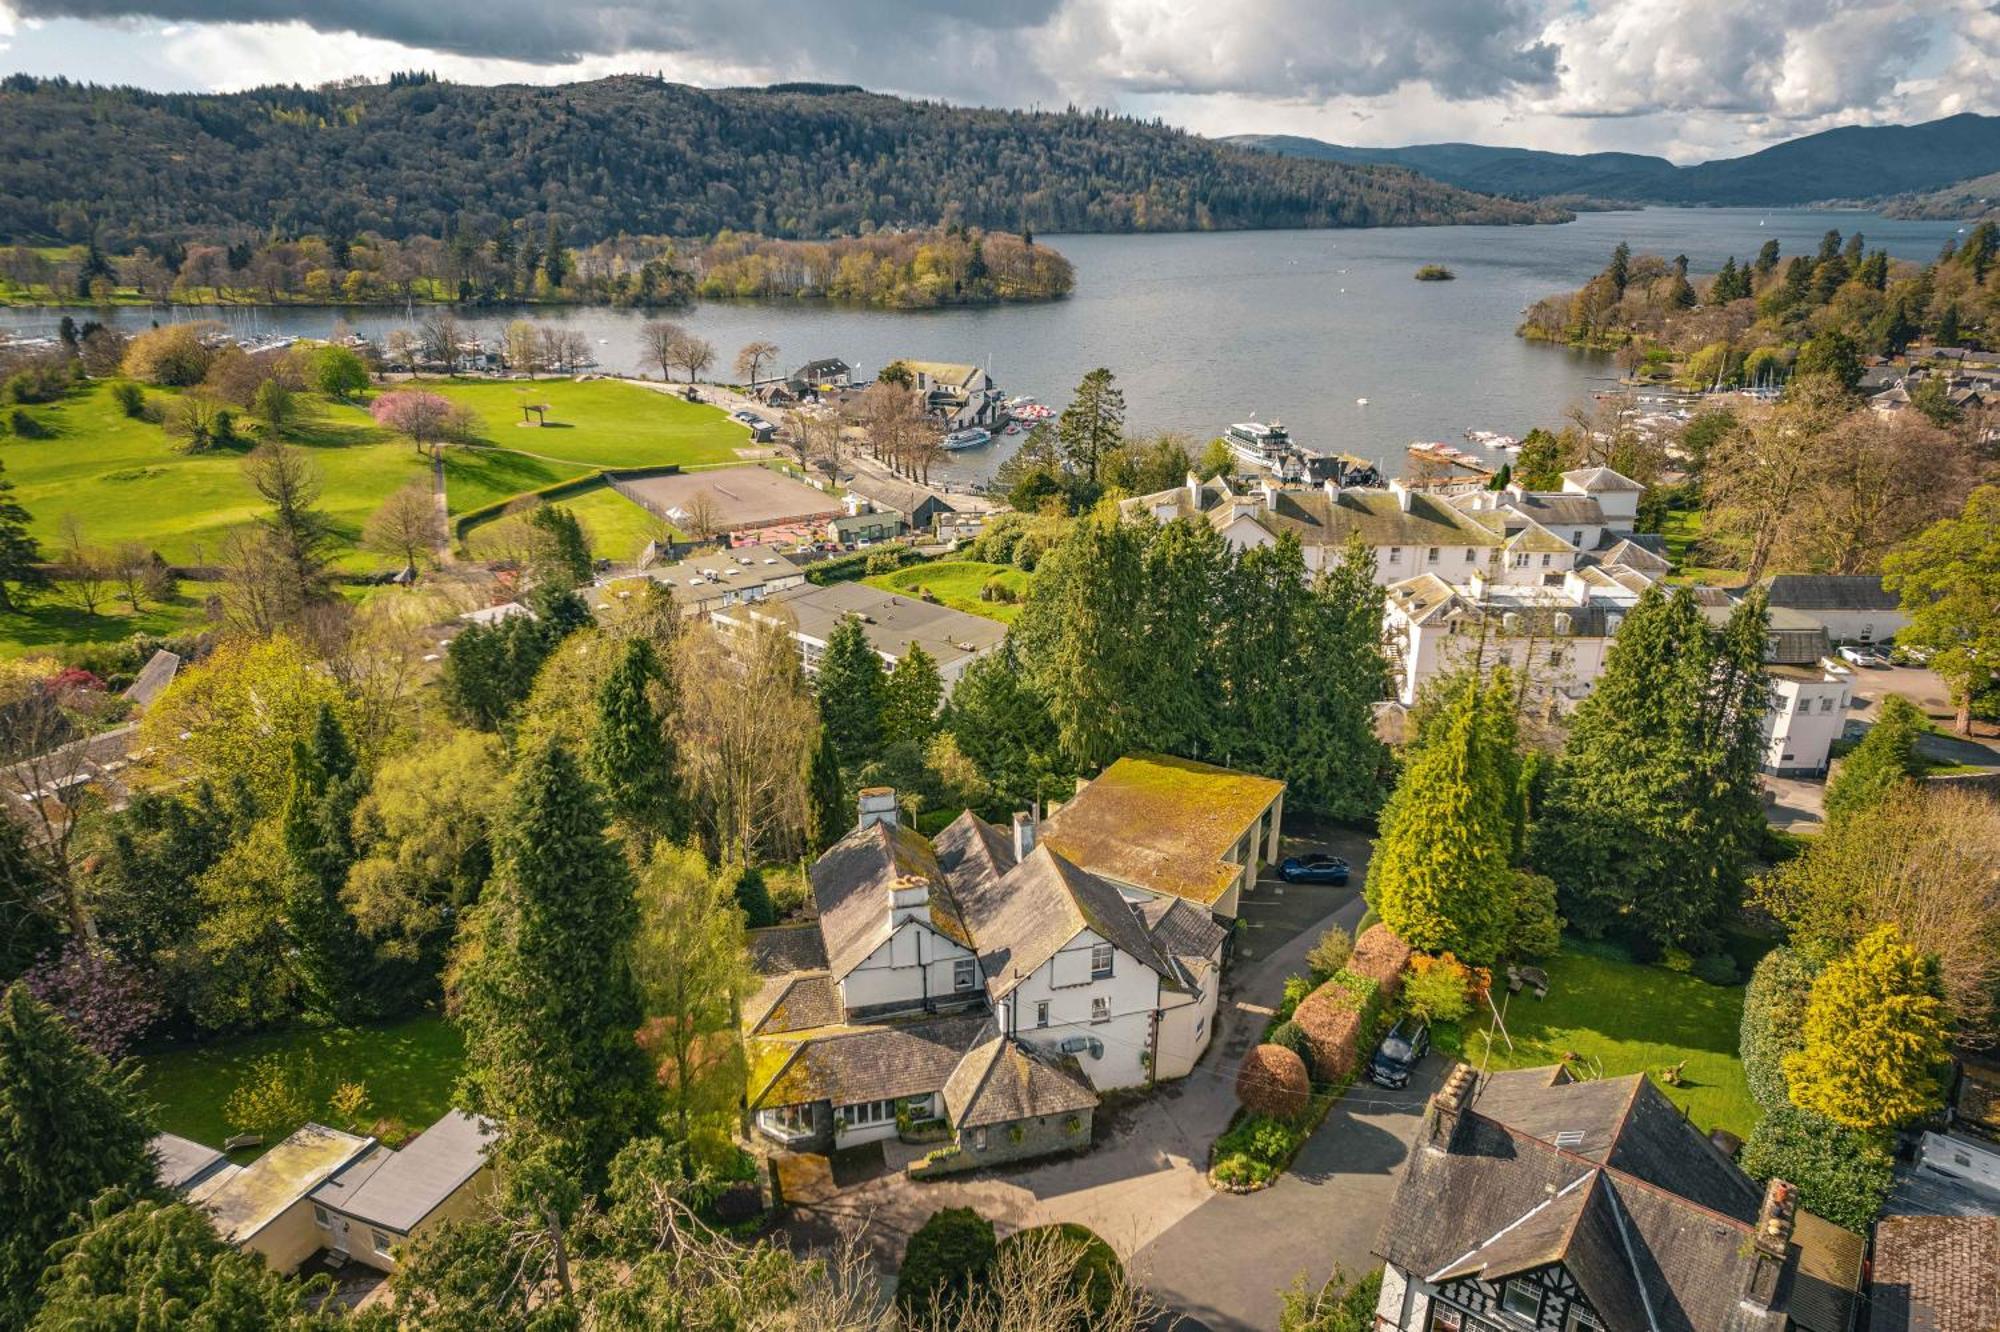 Burn How Garden House Hotel Bowness-on-Windermere Exterior foto